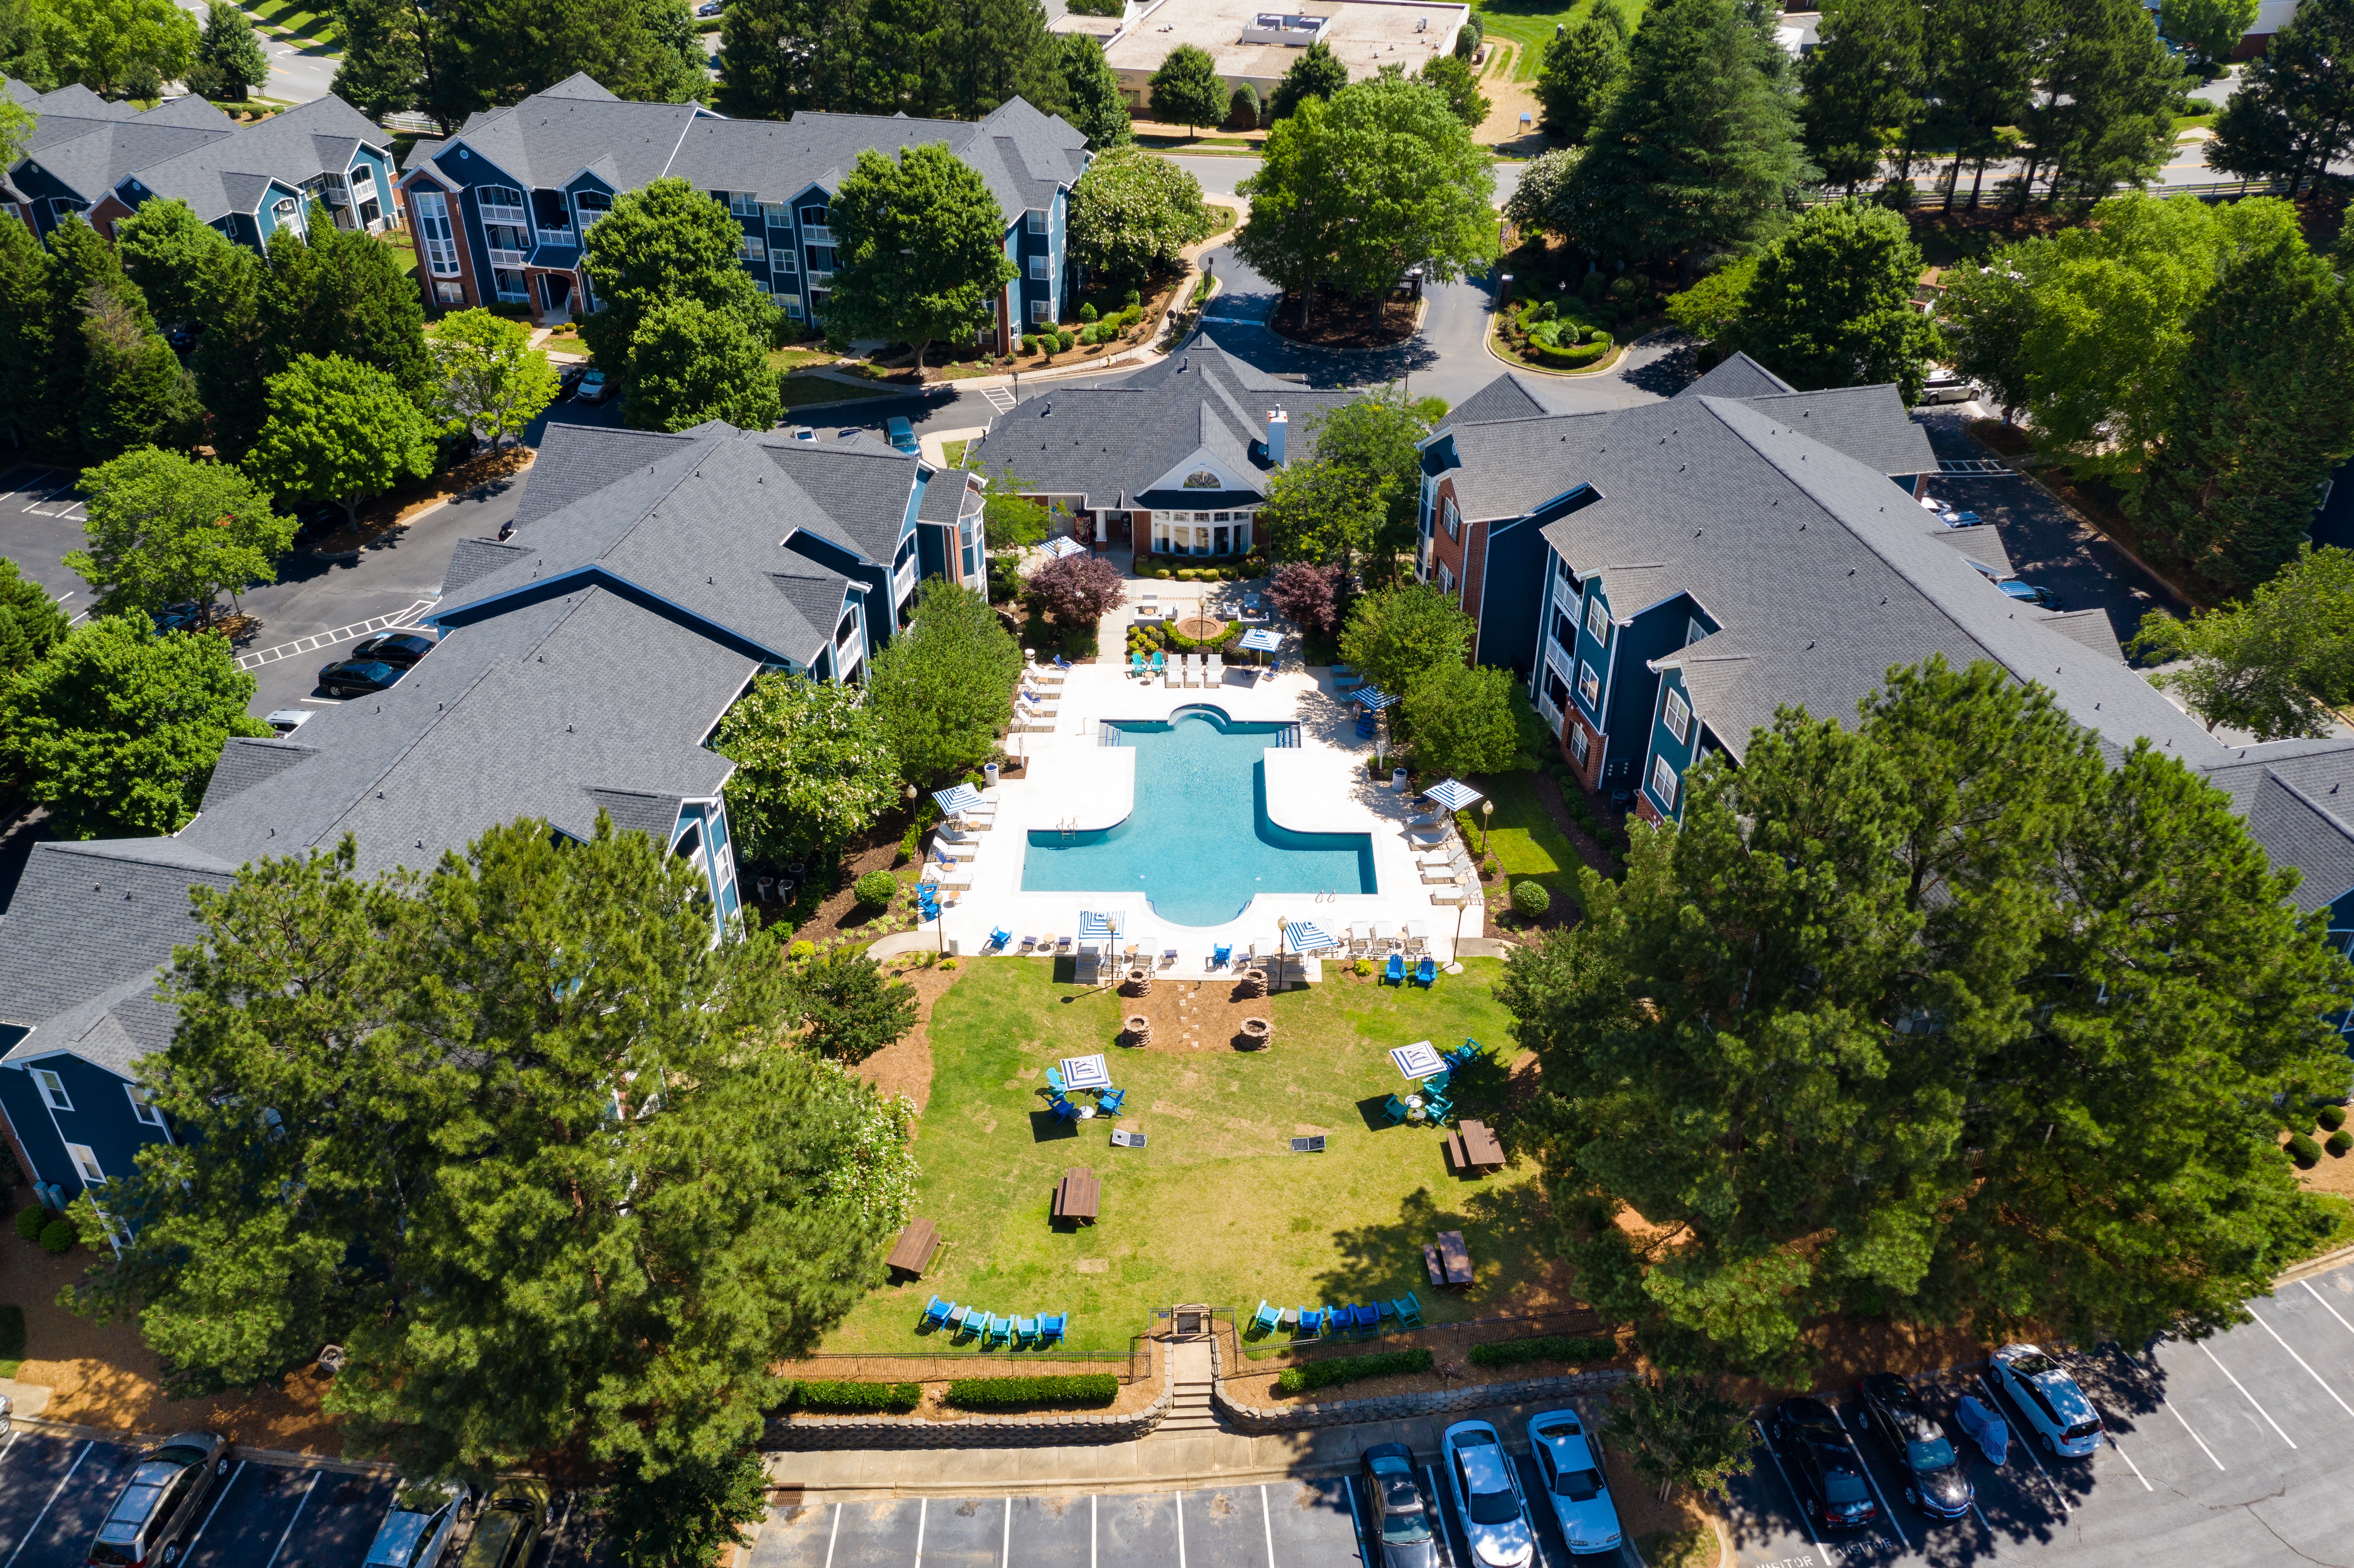 37th Parallel Properties Enters the Charlotte Market, 37th Parallel Properties Enters the Charlotte Market with Acquisition of Greys Harbor at Lake Norman